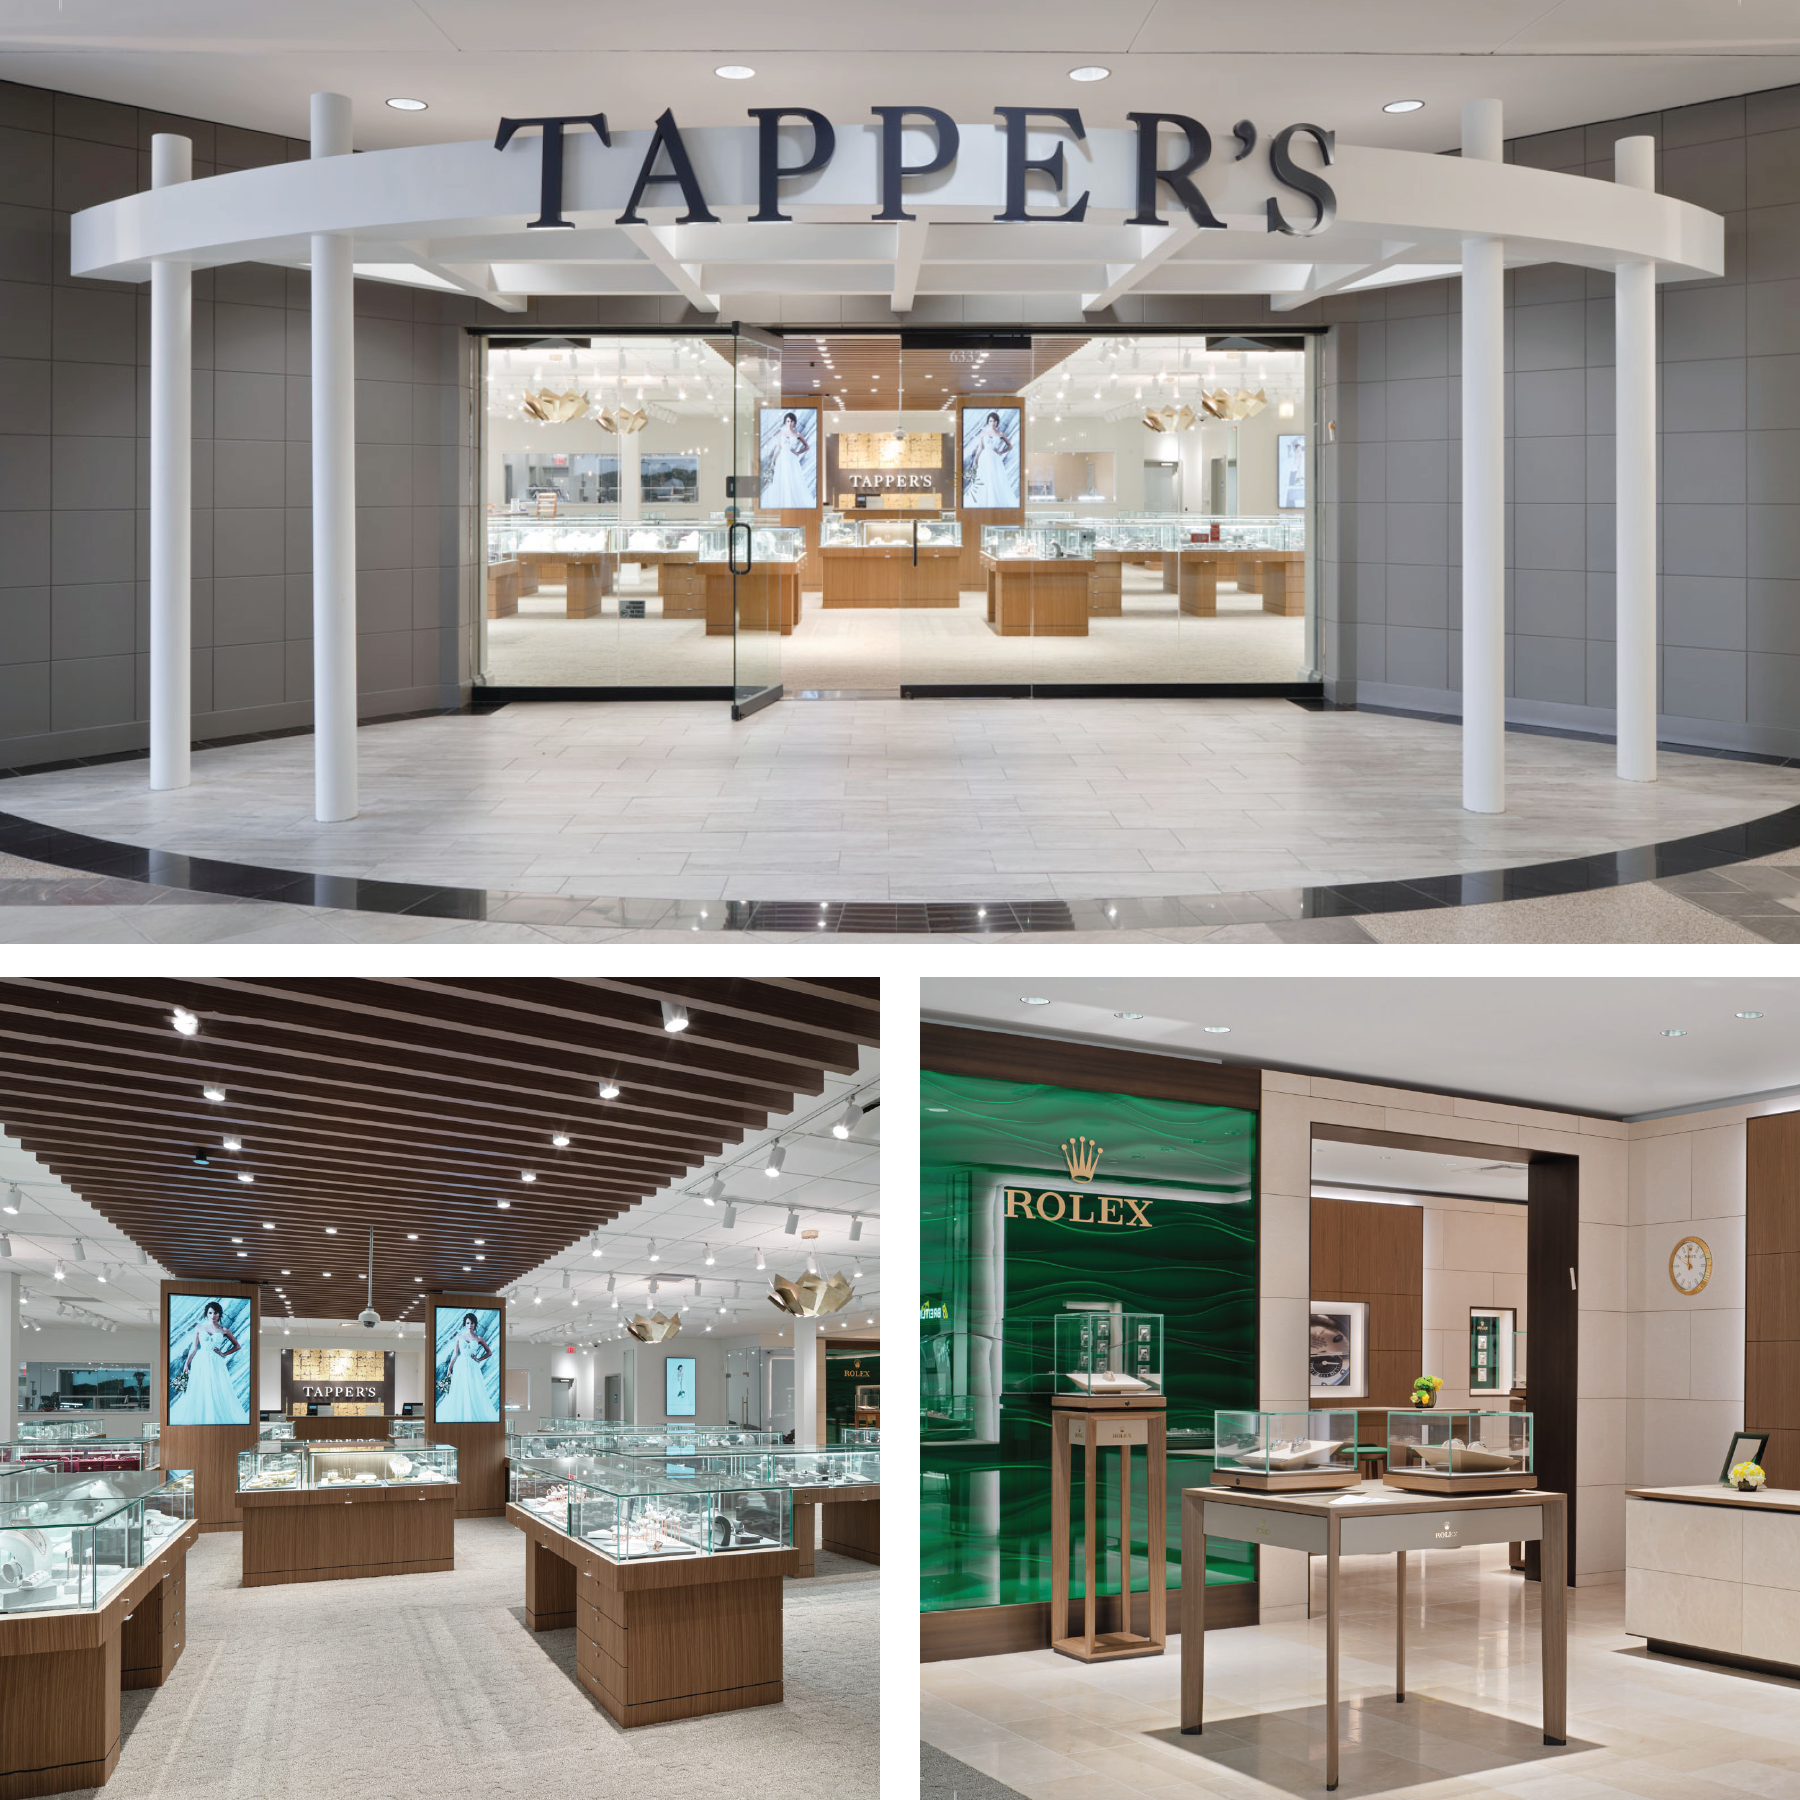 Tapper's Orchard Mall 2020 Remodeled Showroom with a Rolex Shop in Shop